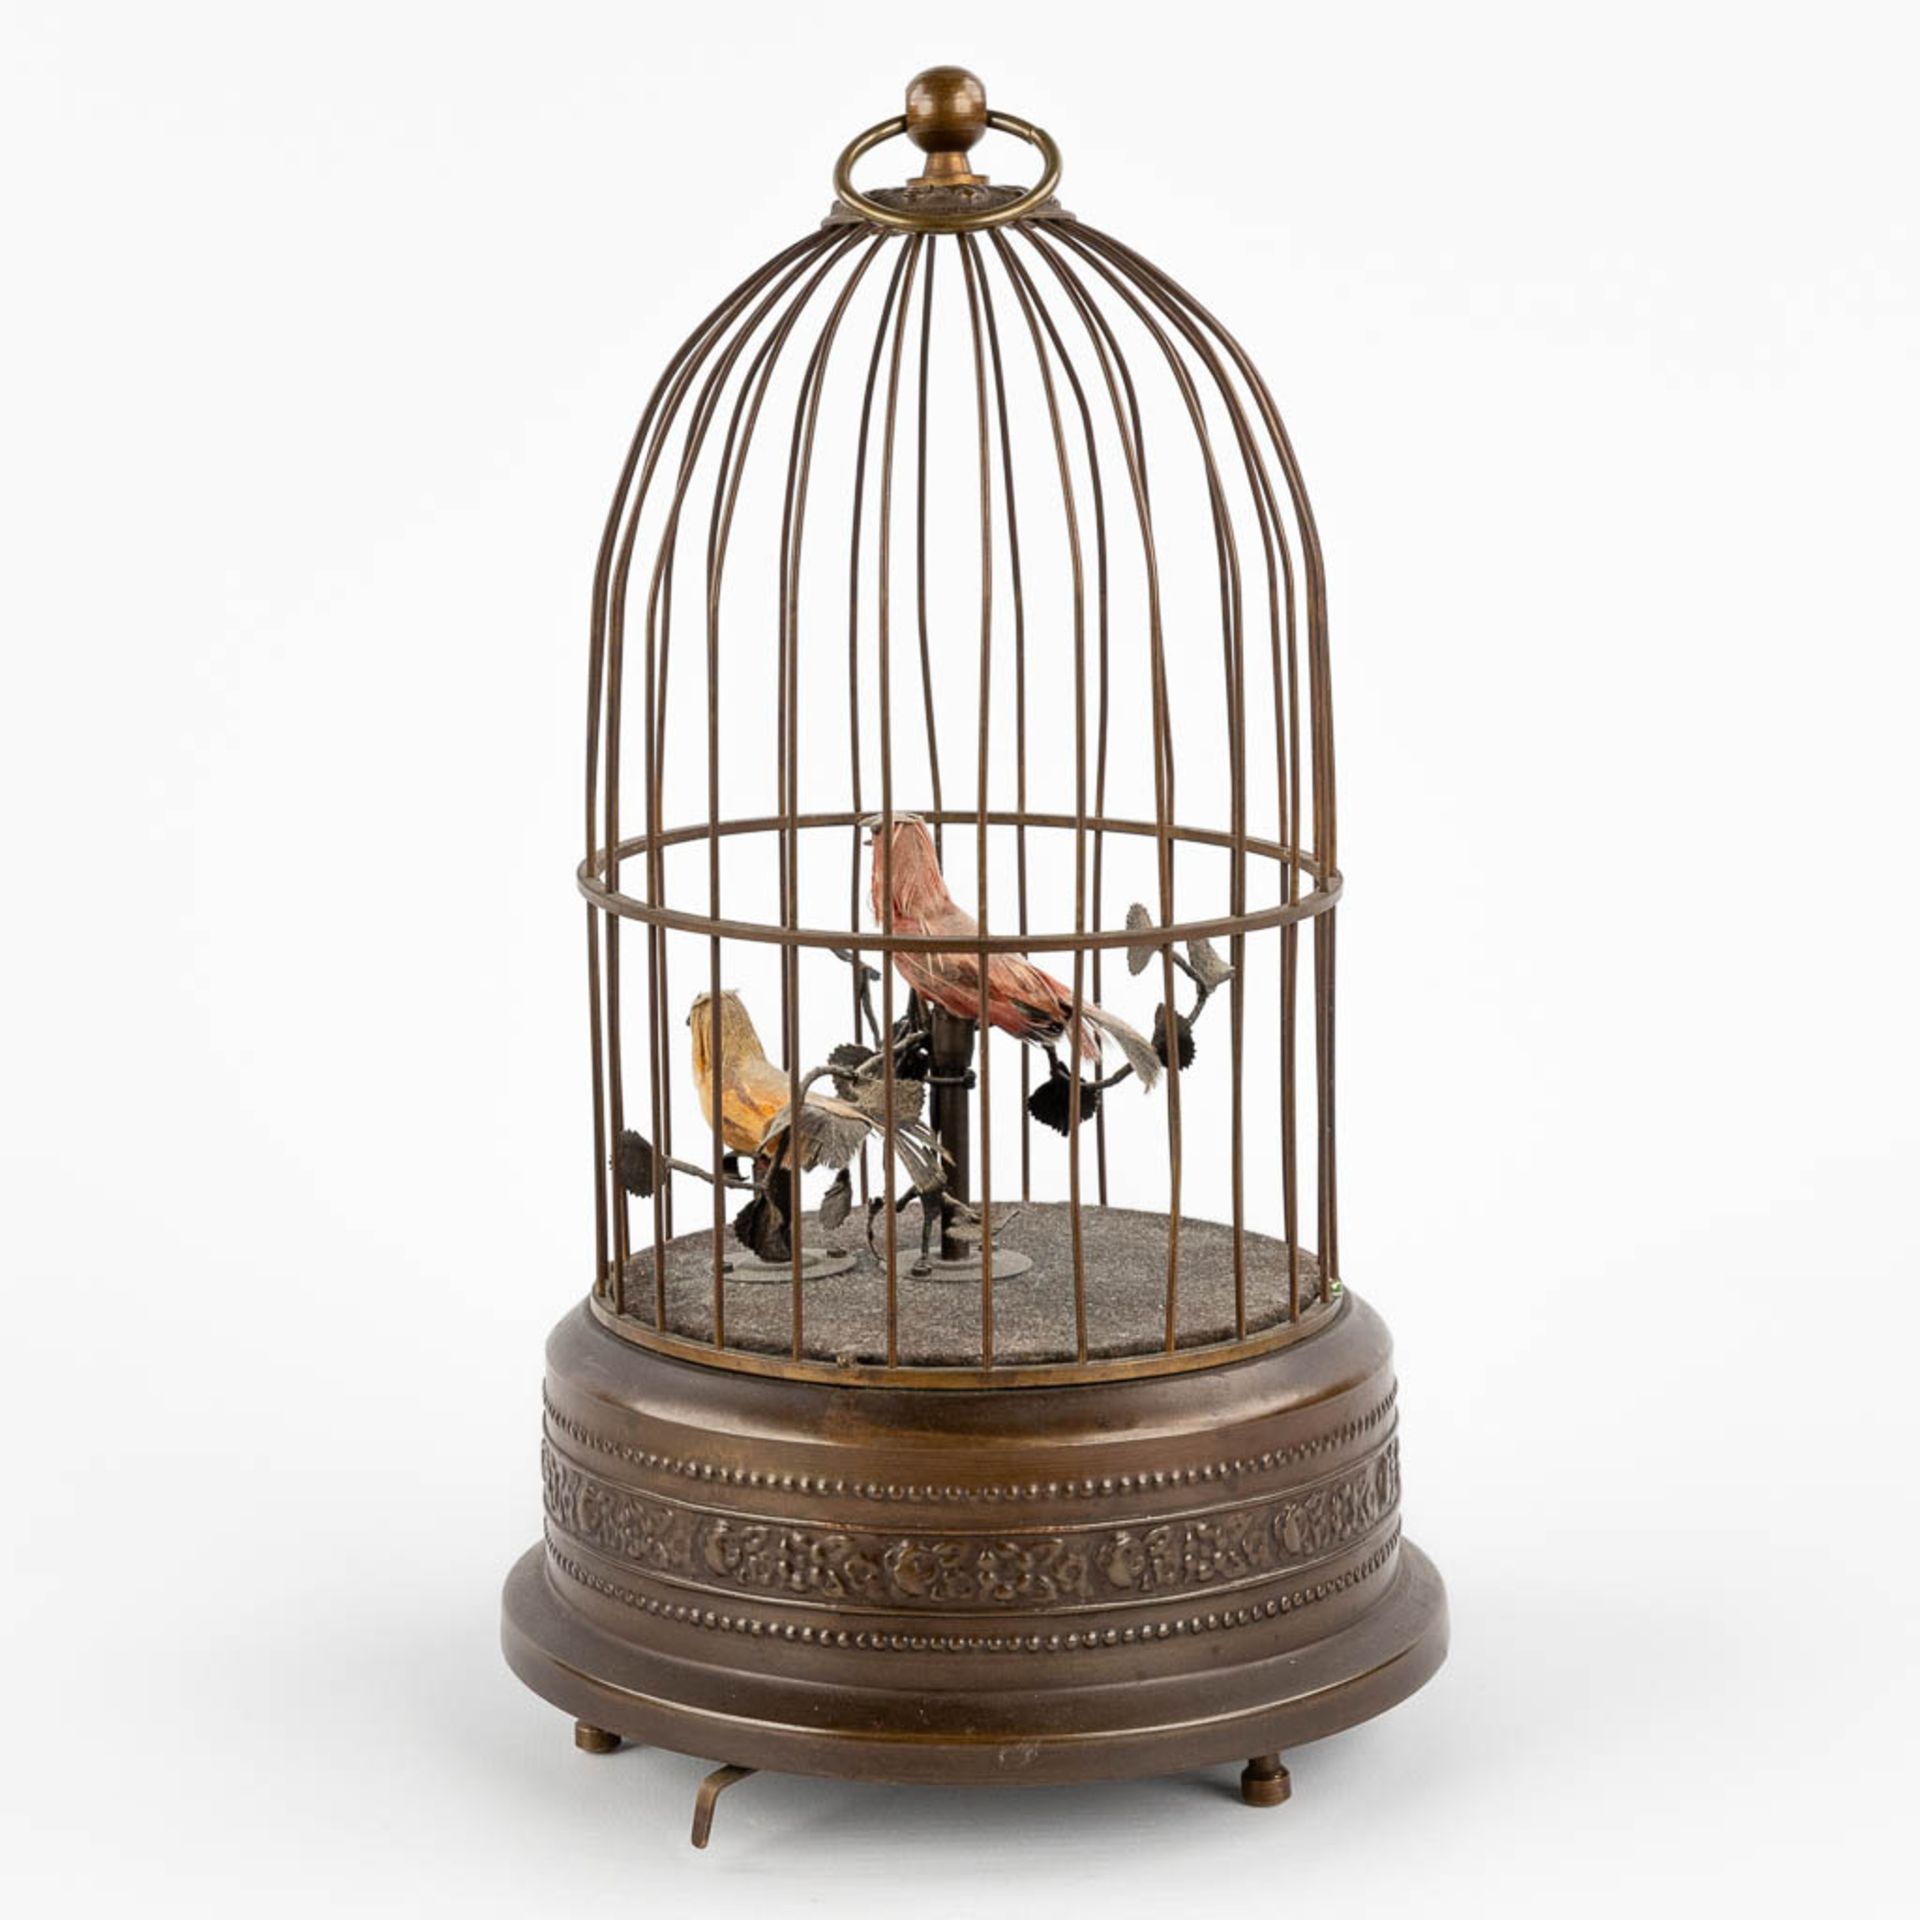 A bird cage automata with a music box. (H:28 x D:15,5 cm) - Image 5 of 12